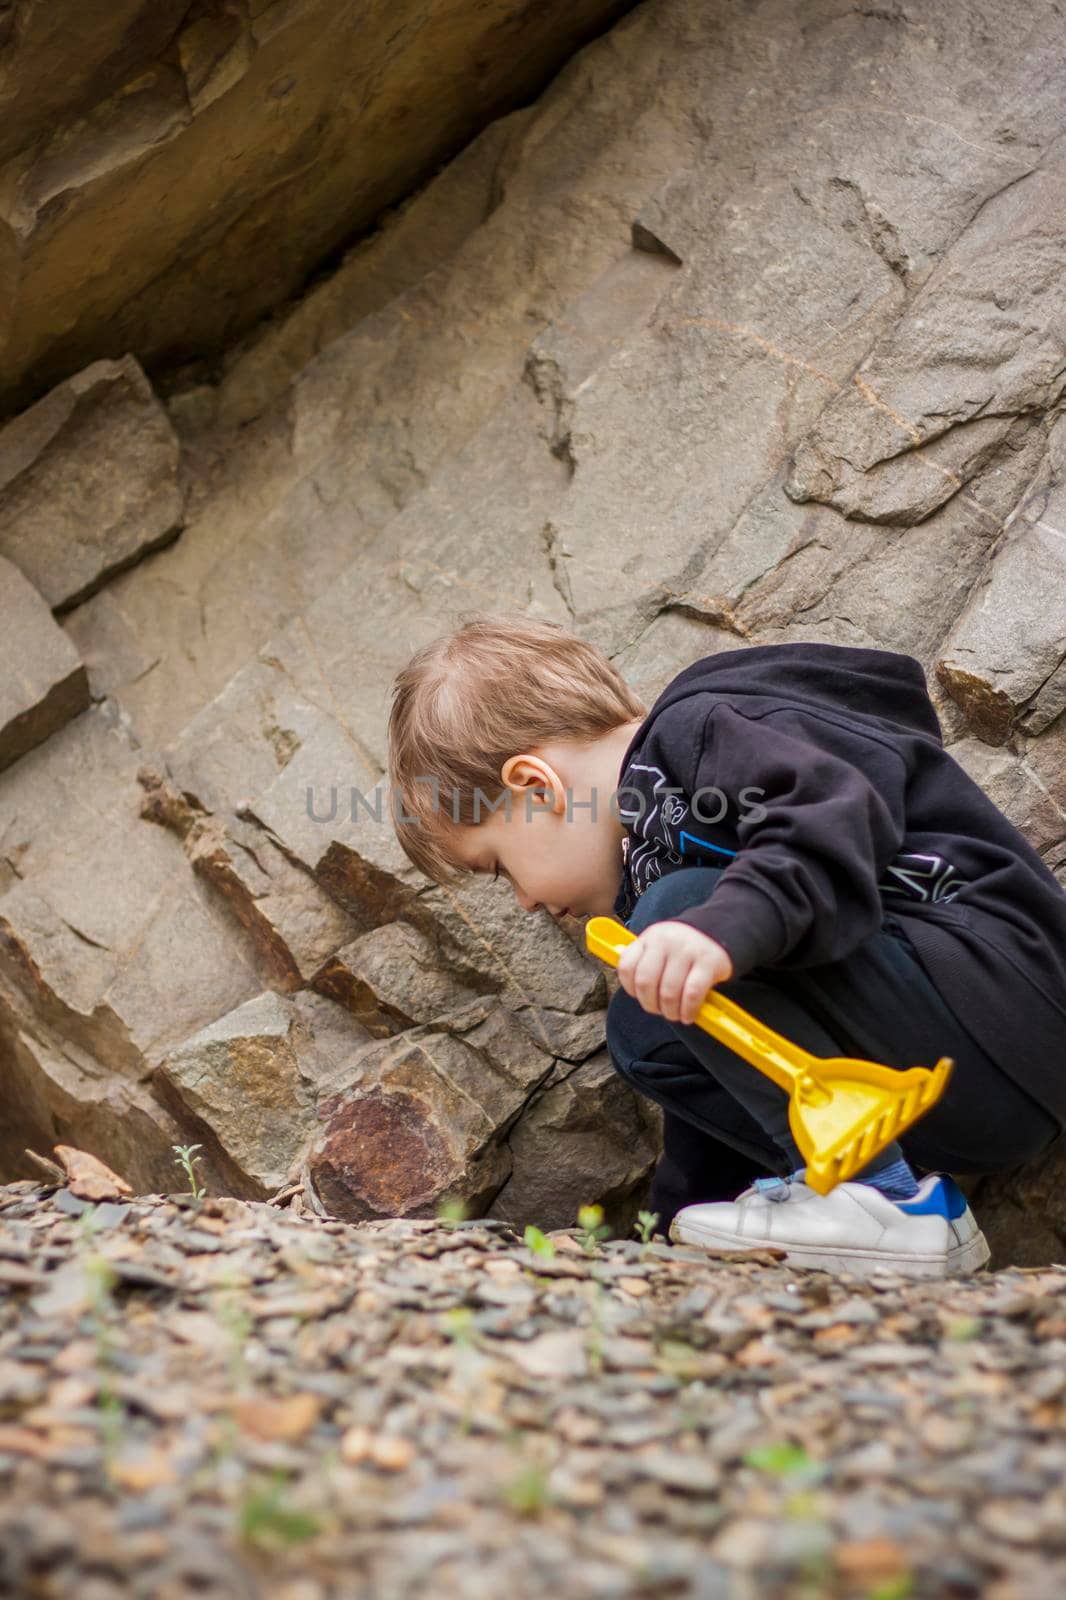 A boy-child on the background of a rocky mountain looks at something with curiosity and is surprised. Nature, rocks, mountains. Portrait of a cute boy outdoors.